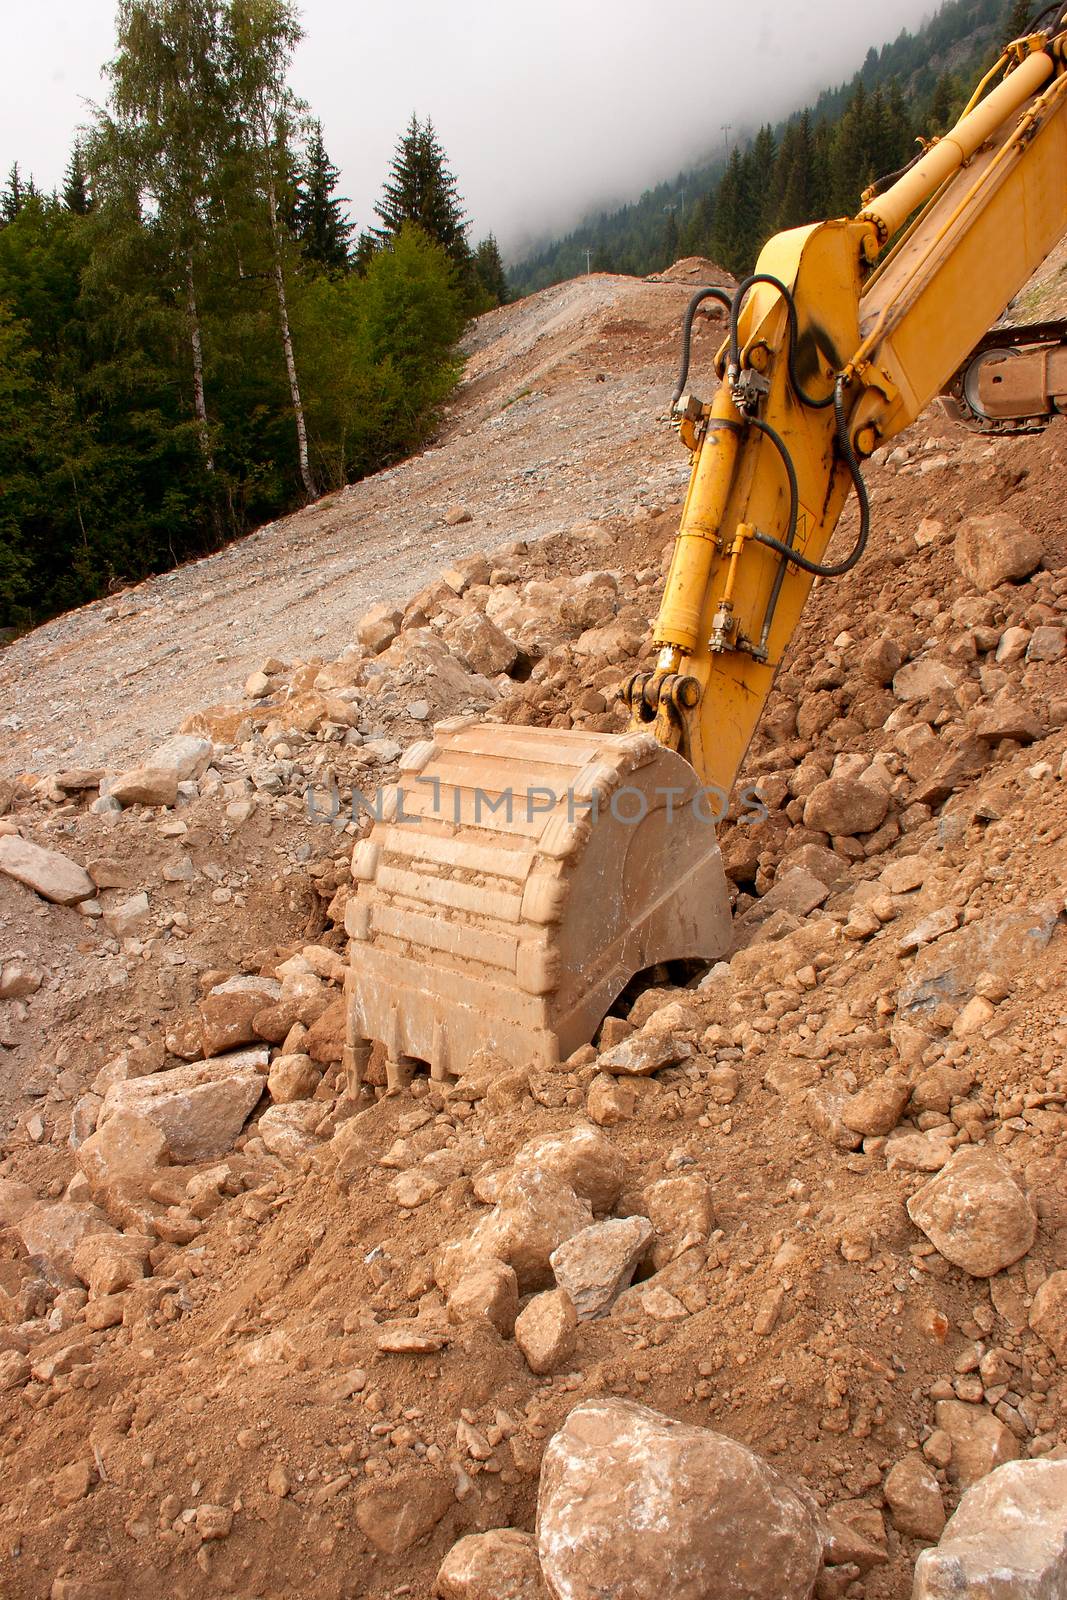 A yellow digger or excavator used to prepare a new track in the mountains